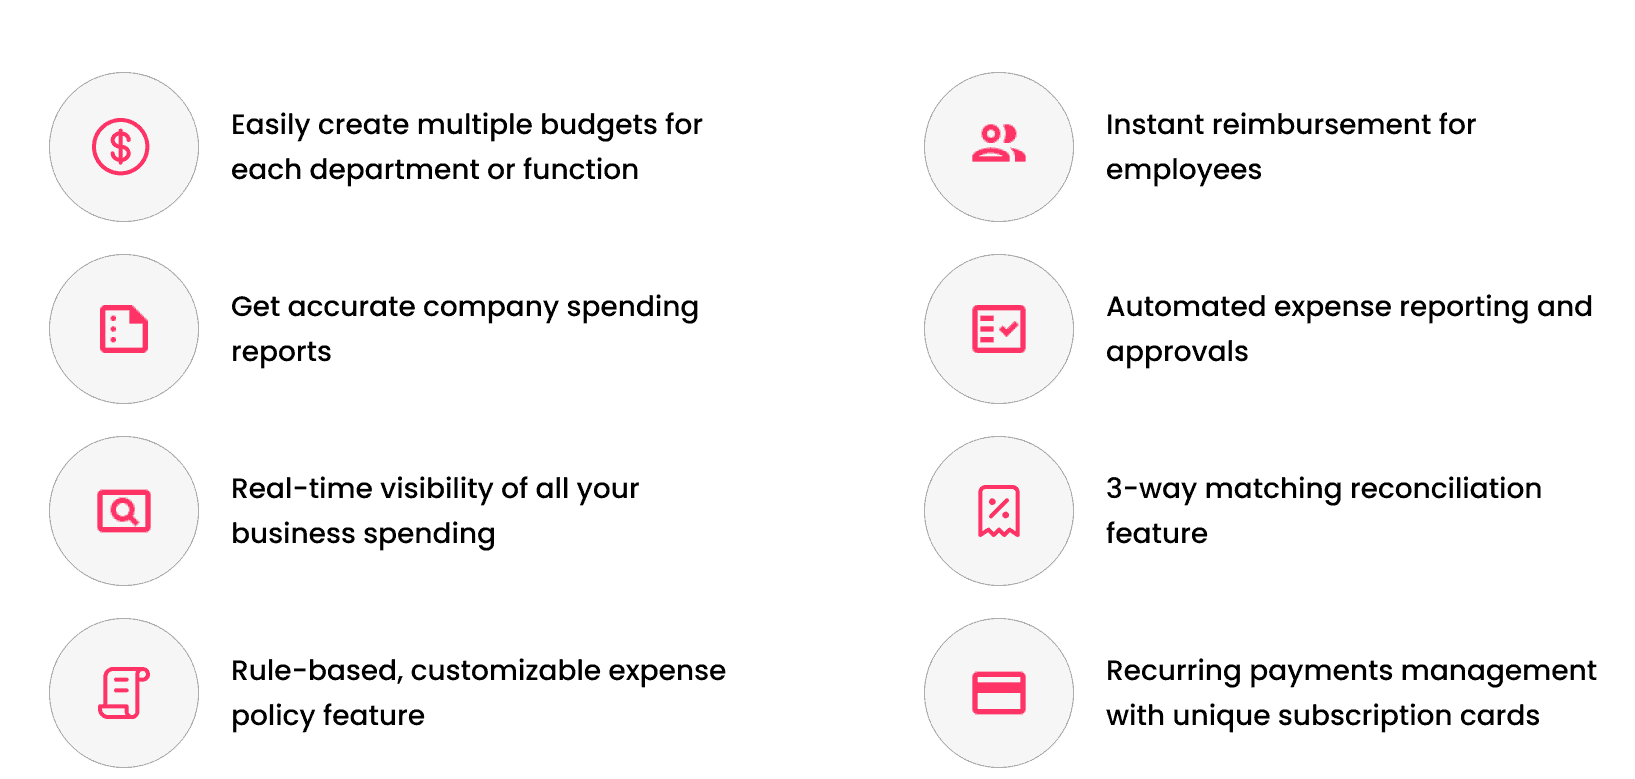 Why should you choose Volopay?